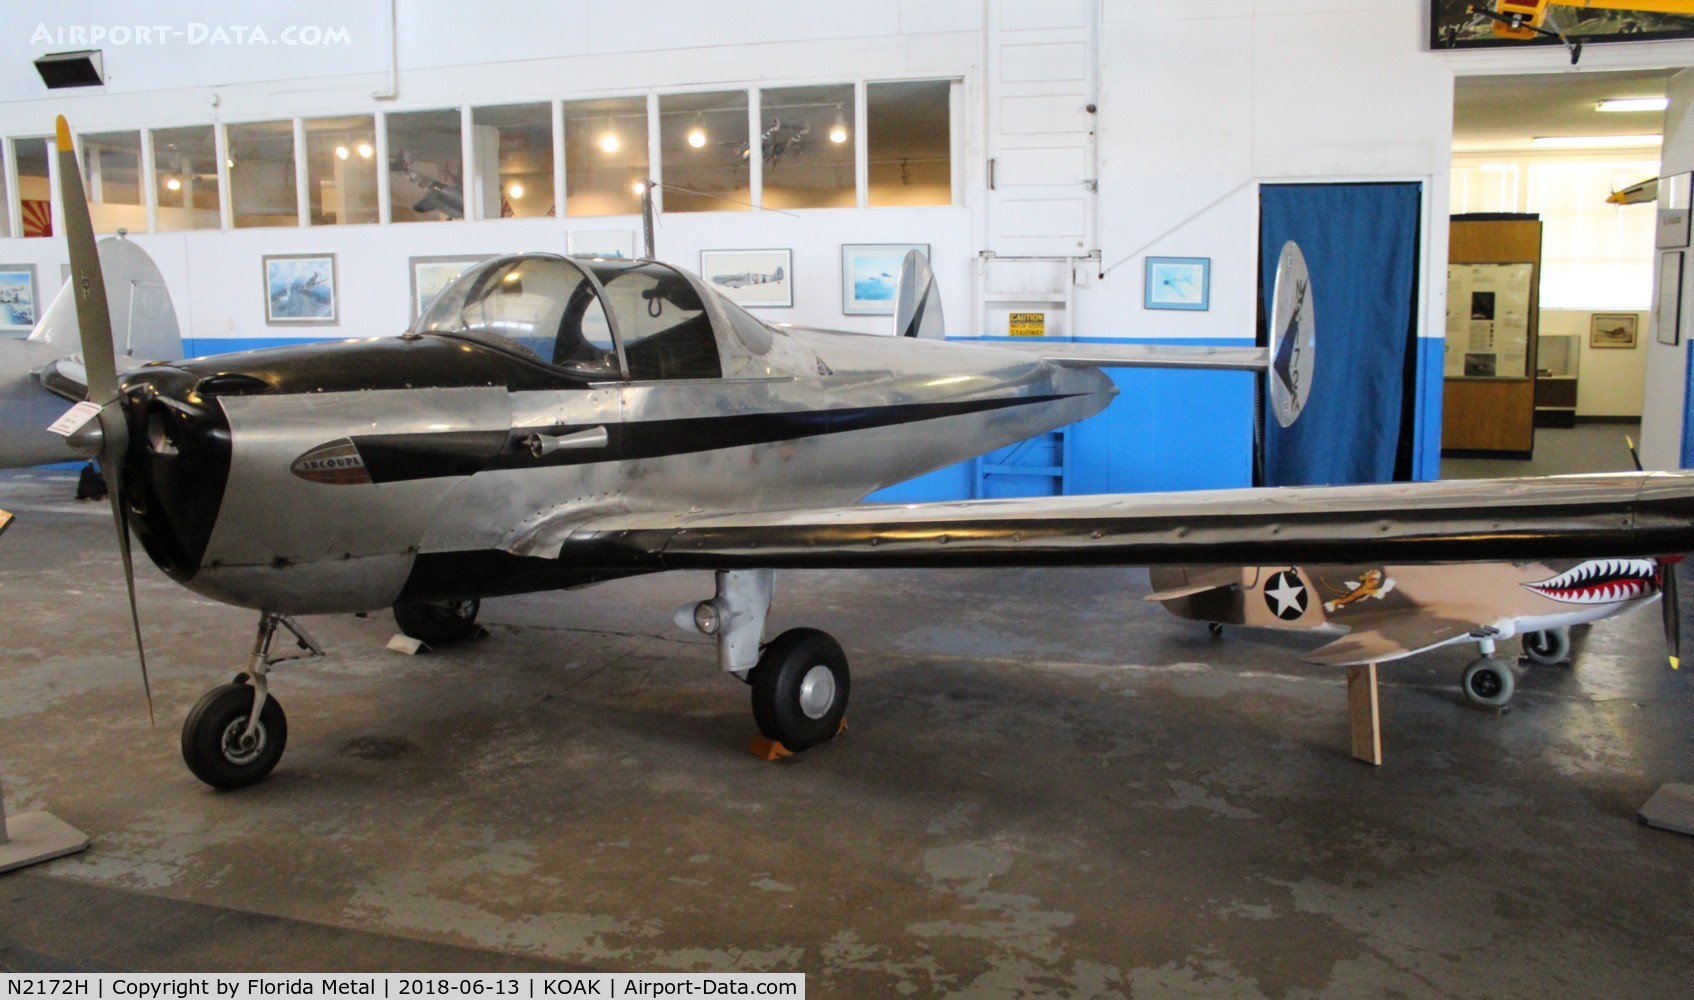 N2172H, 1994 Erco 415C Ercoupe C/N 2795, Oakland Museum 2018